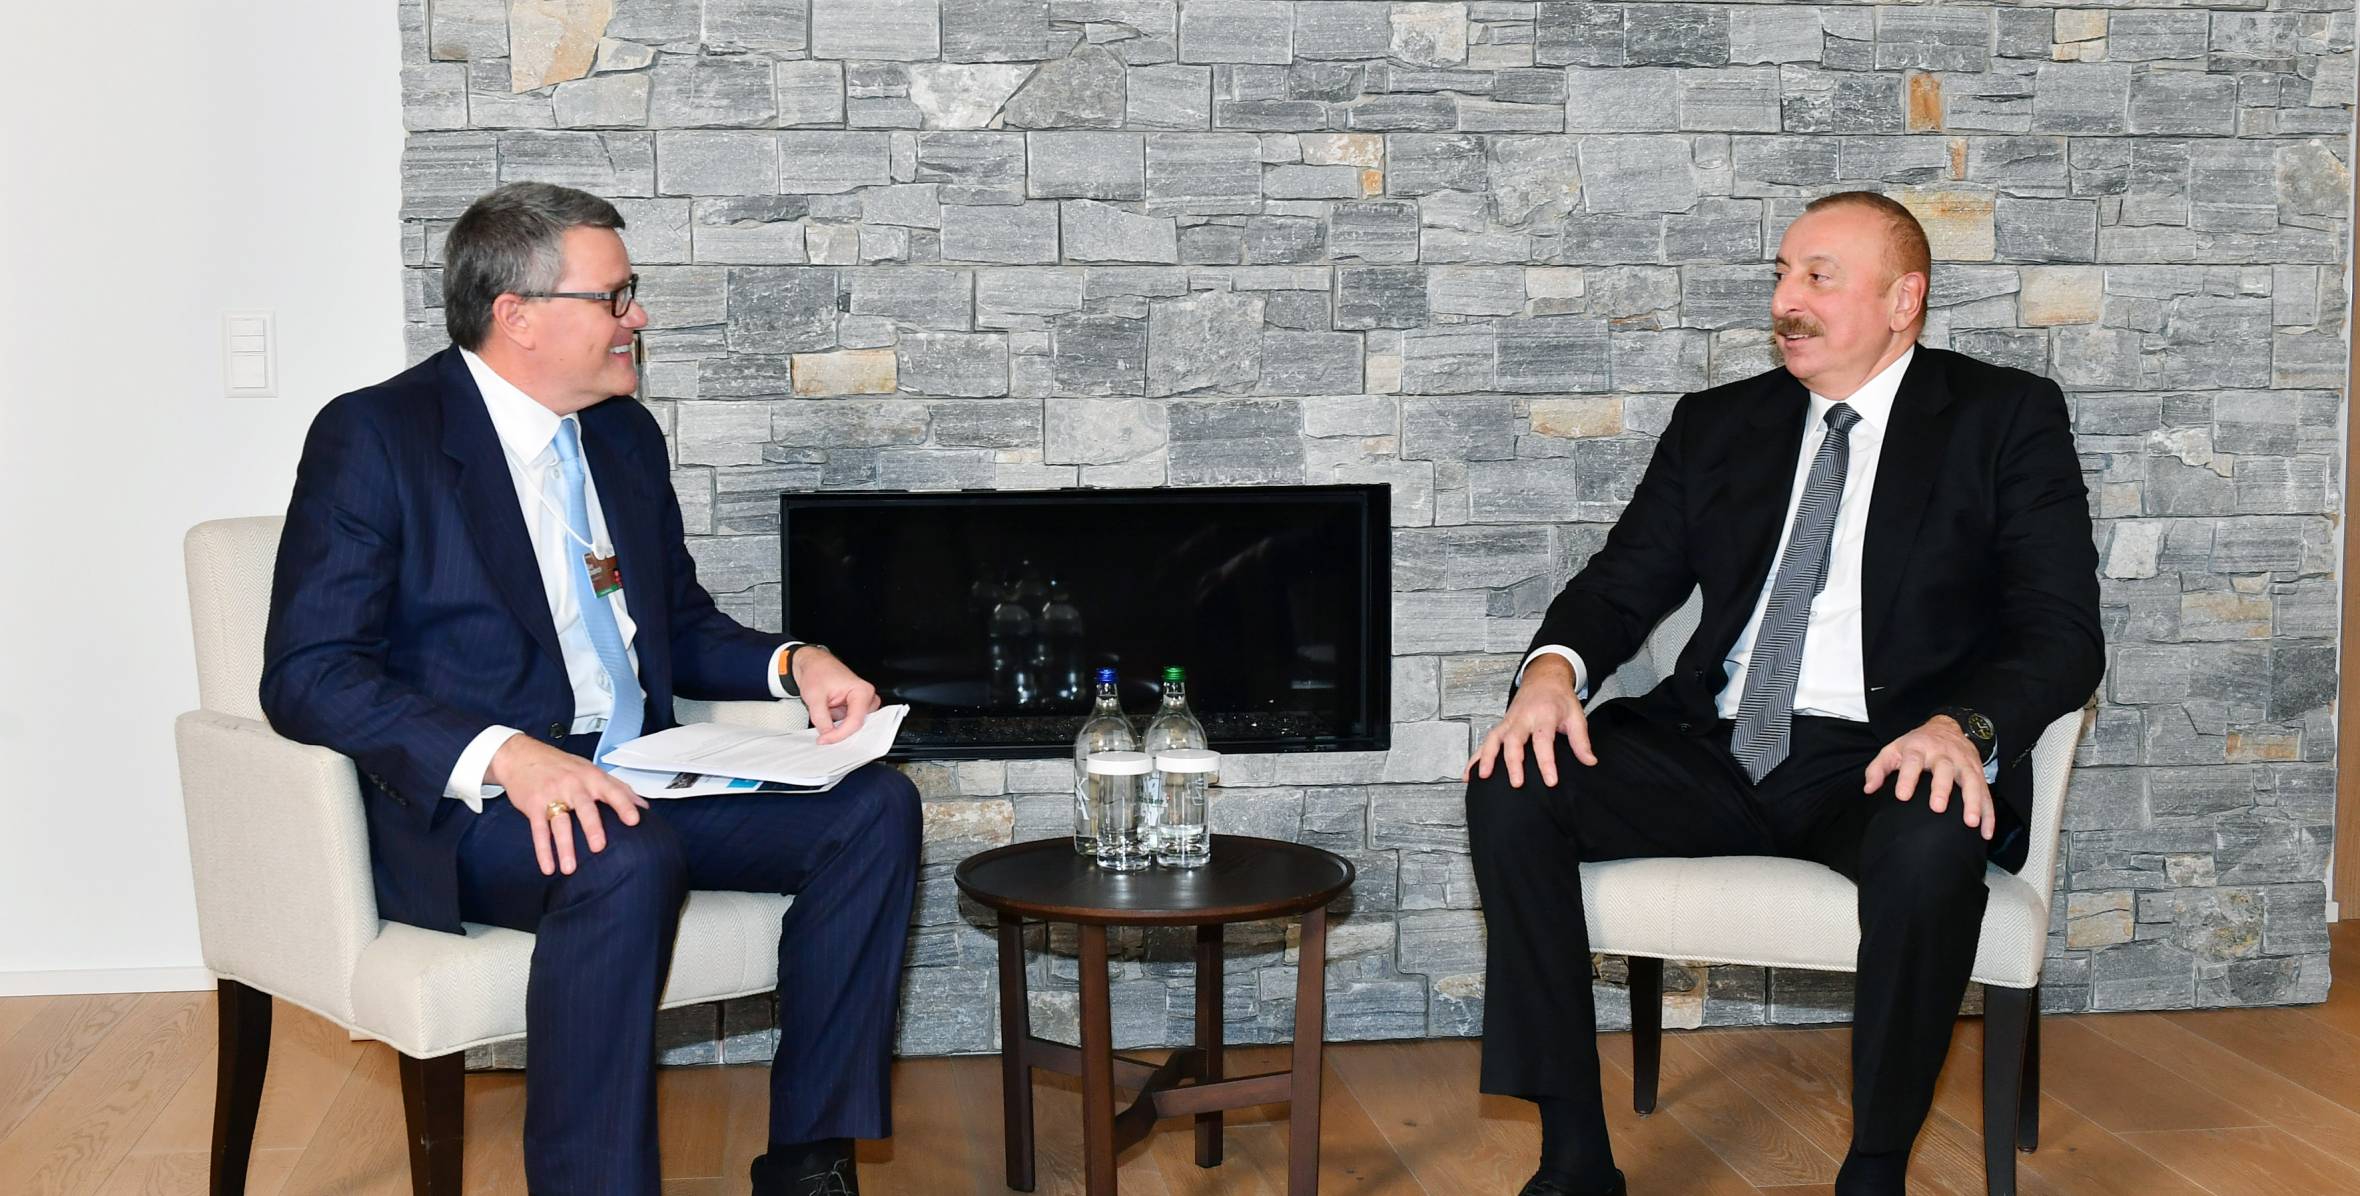 Ilham Aliyev met with Senior Vice President and Global Innovation Officer for CISCO in Davos